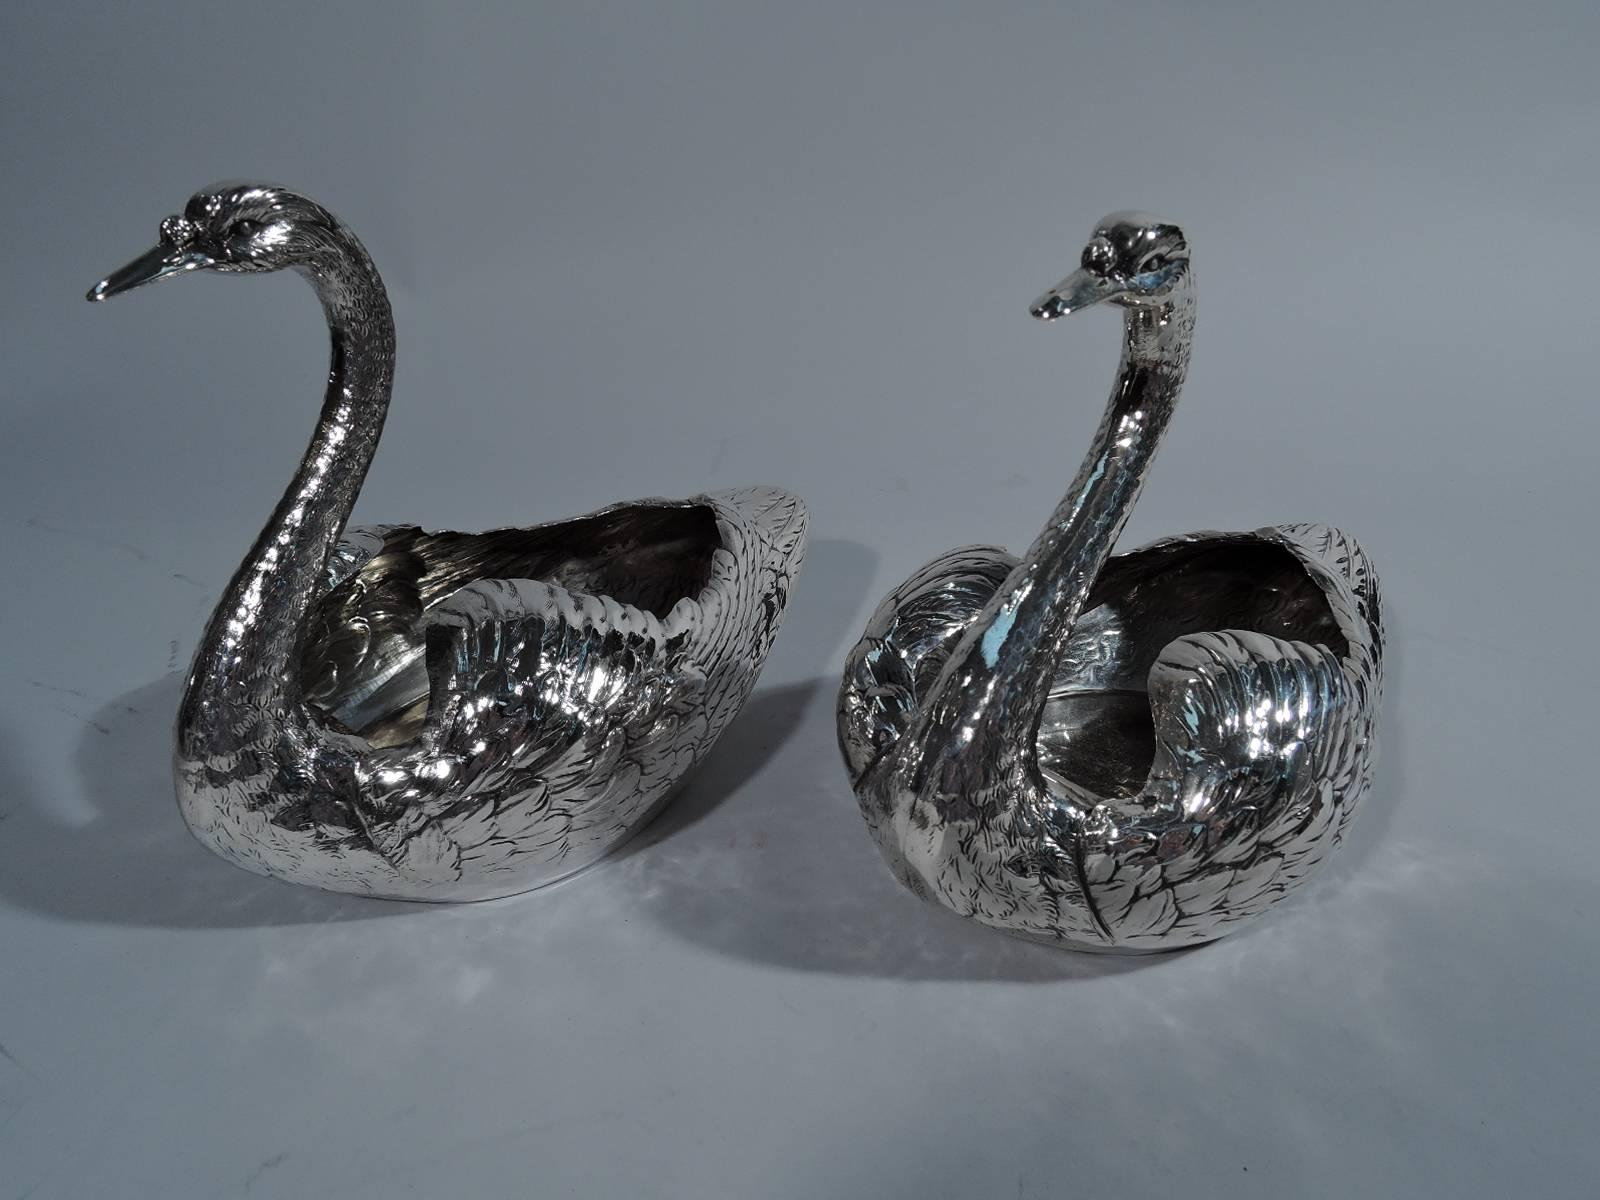 Pair of sterling silver swans. Made by Durgin (part of Gorham) in Concord, New Hampshire, circa 1915. Each: distinctive feathering with downy plumed wings and scaly neck as well as closed bill and penetrating eyes. Hollow bodies waiting to be filled